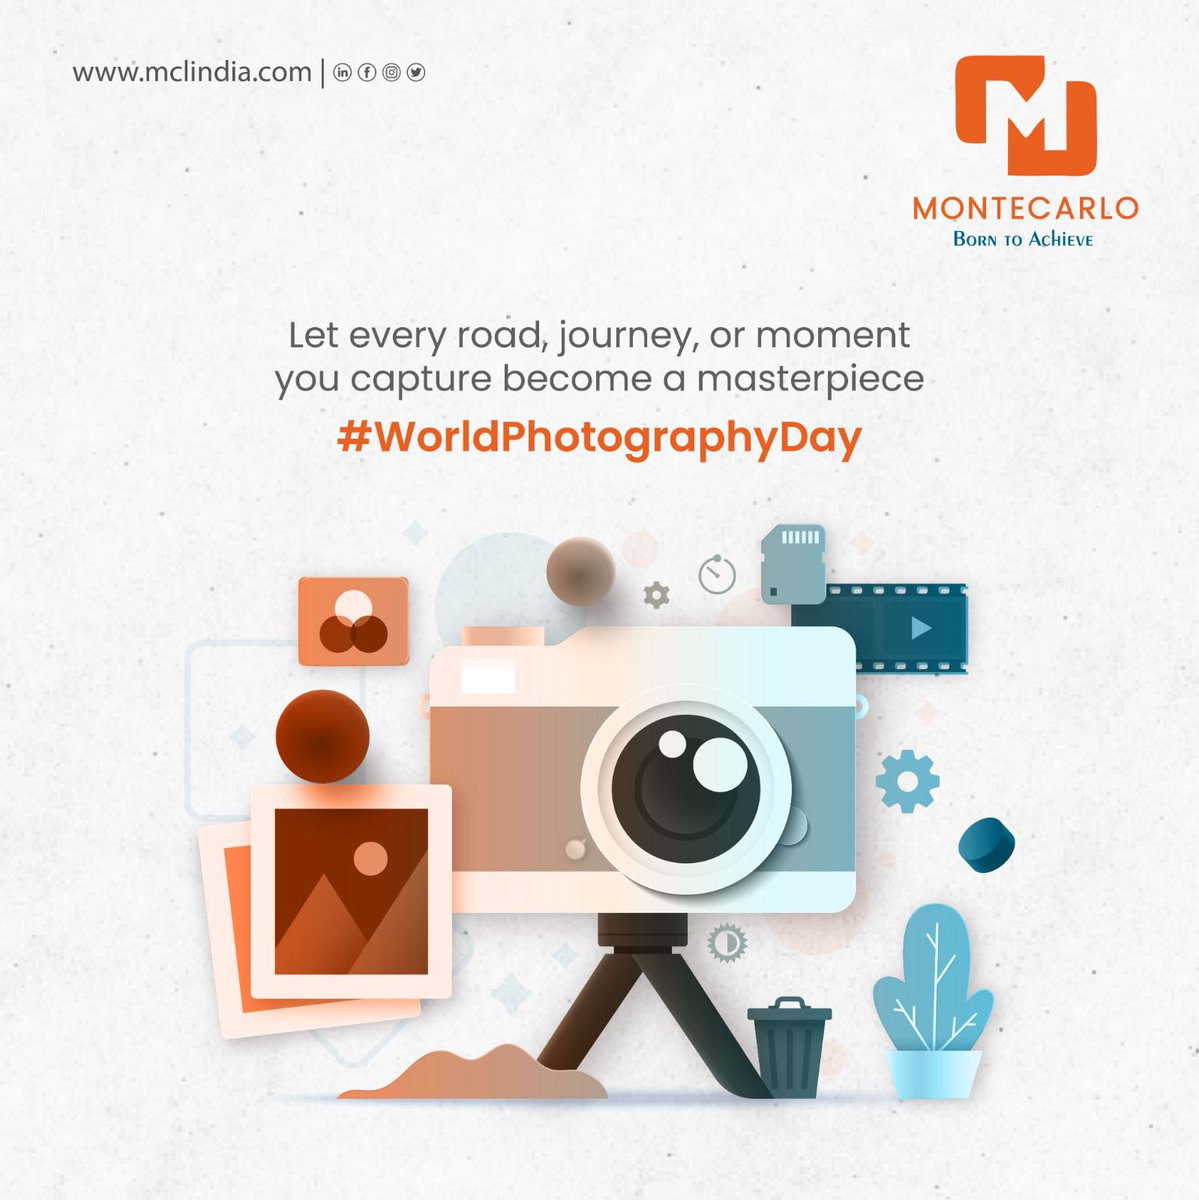 Let's Celebrate the Beauty of Captured Moments and Crafted Stories! From Streets to Skylines, Every Click Holds a World of Wonder.  #WorldPhotographyDay

#CaptureTheMoment #CaptureJoy #montecarlo #MontecarloLimited #construction #development #infrastructure #safety #quality